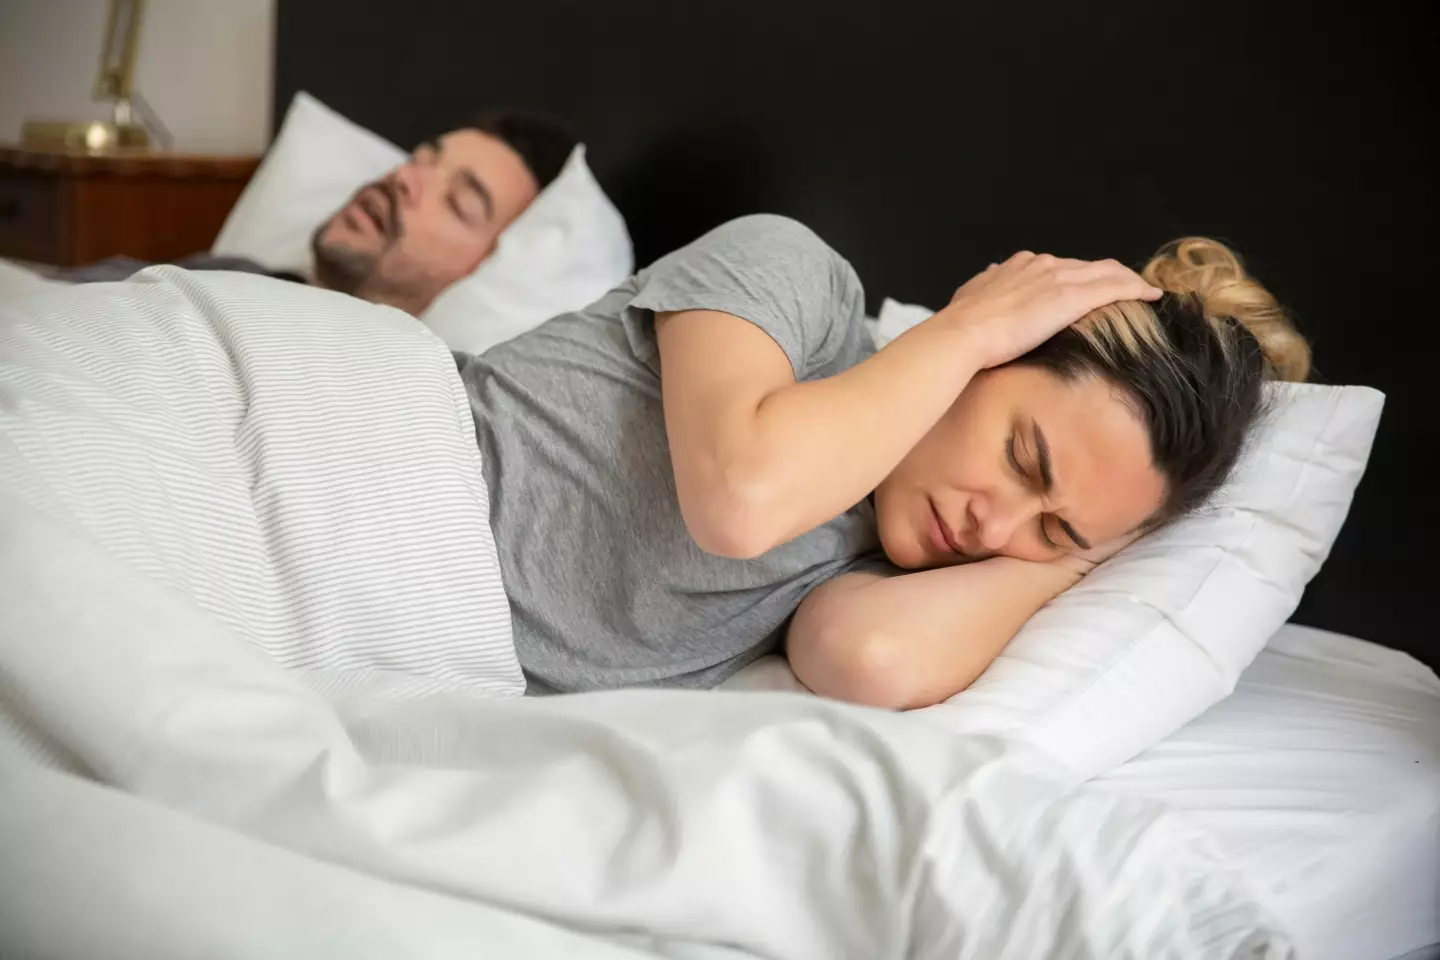 Sleeping on your back makes snoring worse.